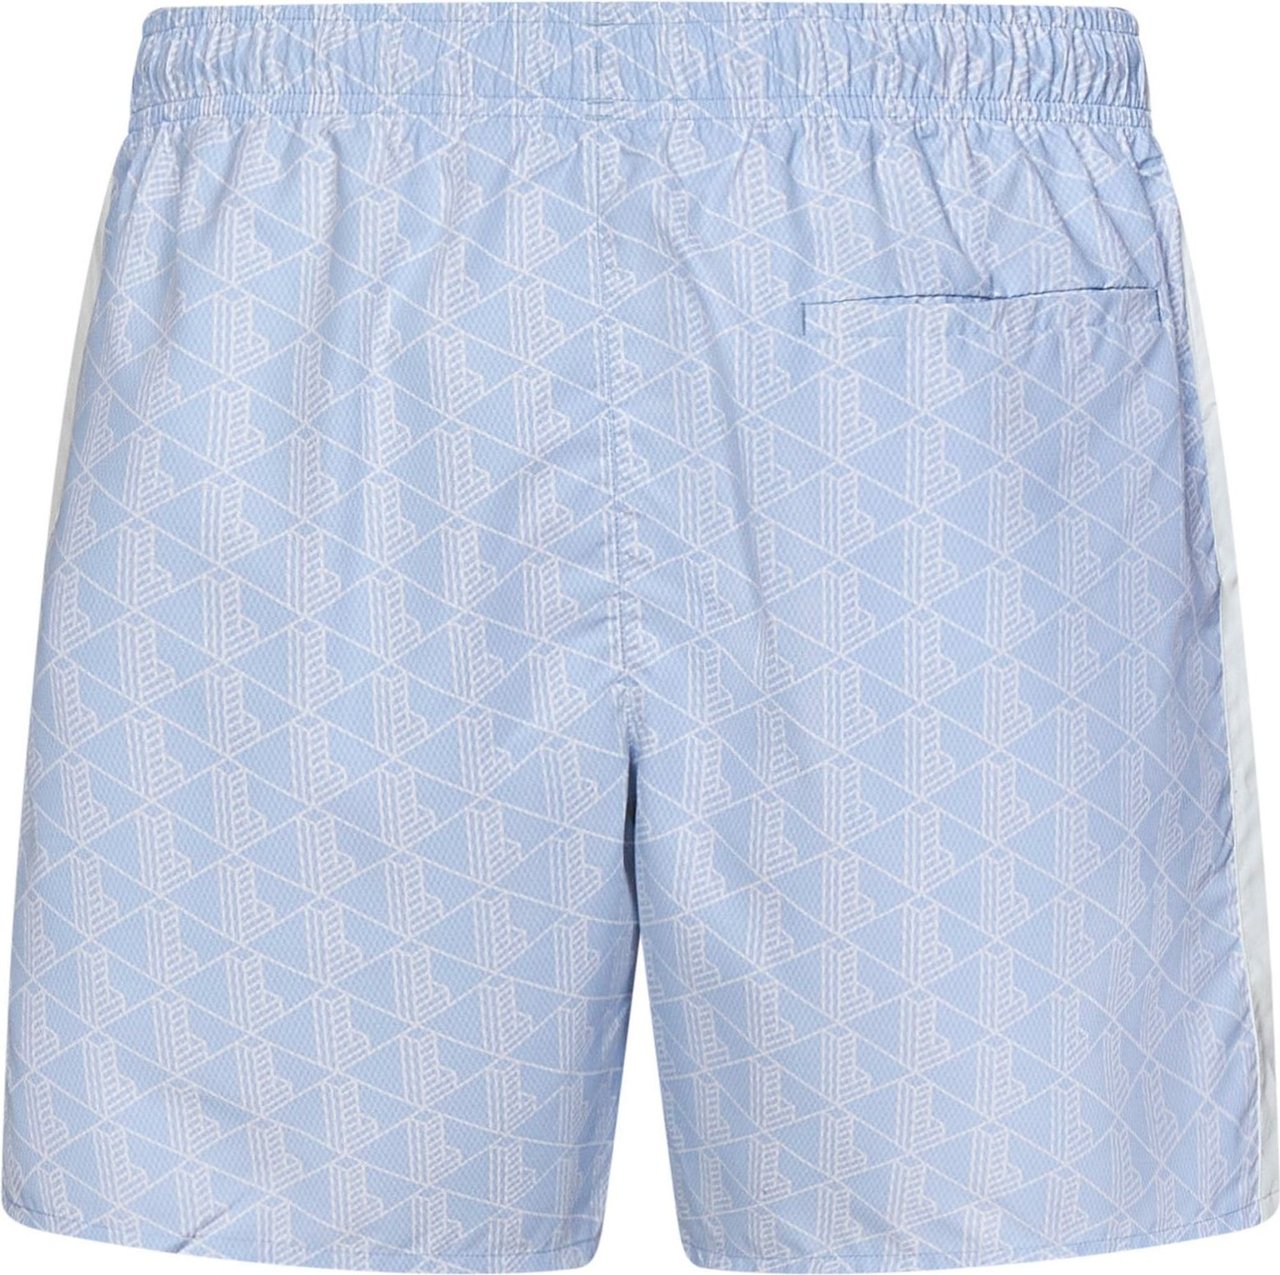 Lacoste Lacoste Sea clothing Clear Blue Blauw